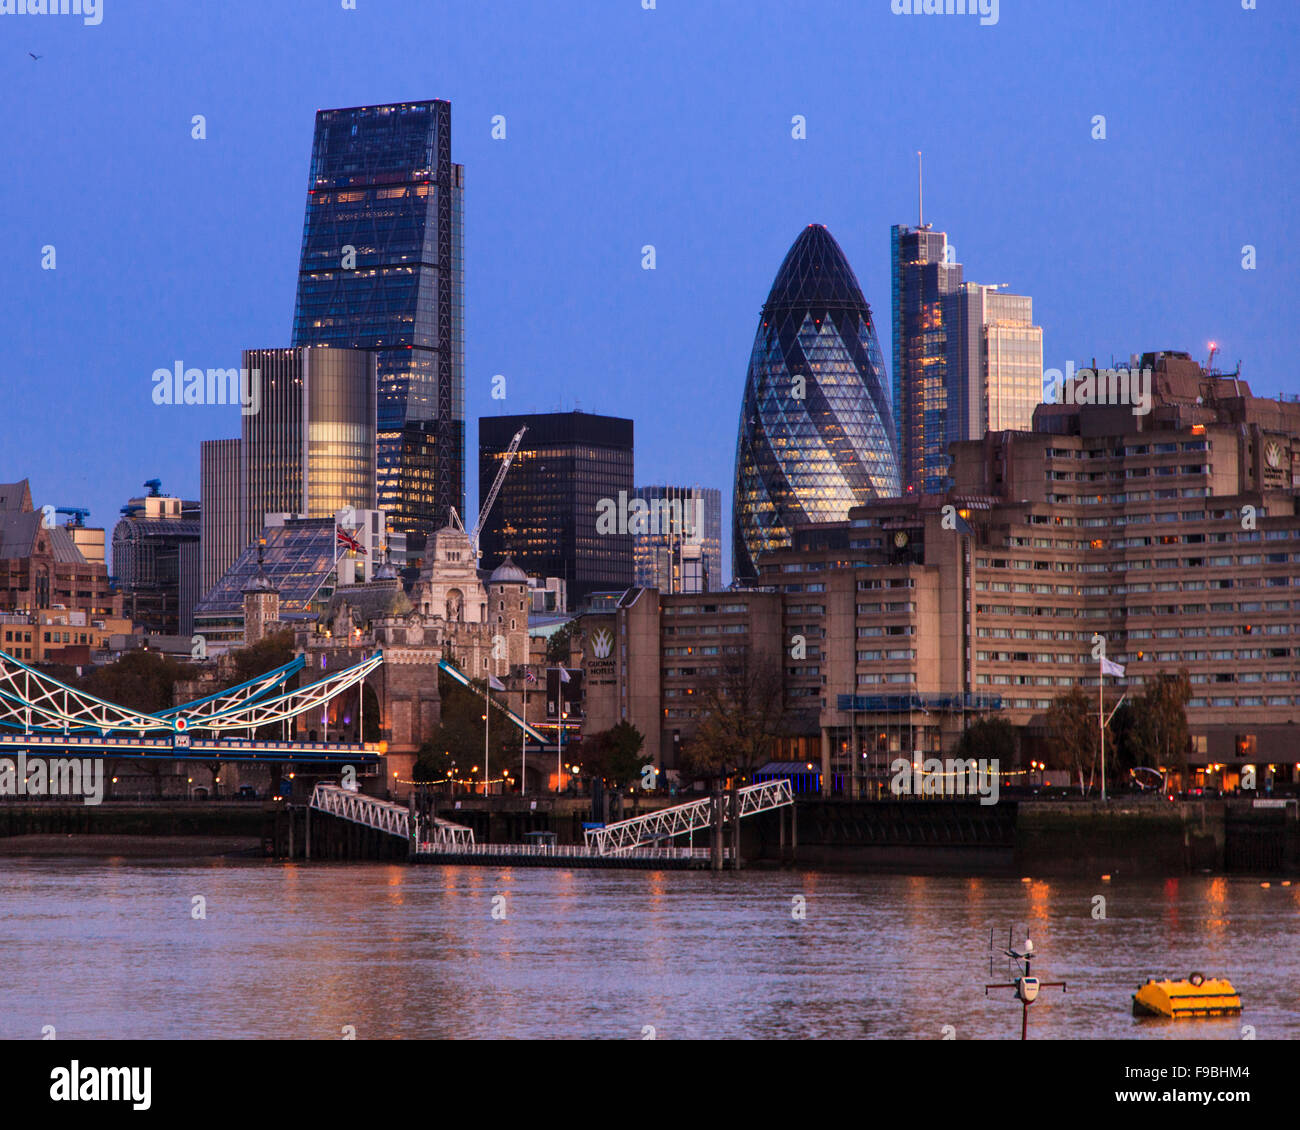 The Cheese Grater and the Gherkin dominate  Tower Bridge and the City of London skyline, early morning Stock Photo